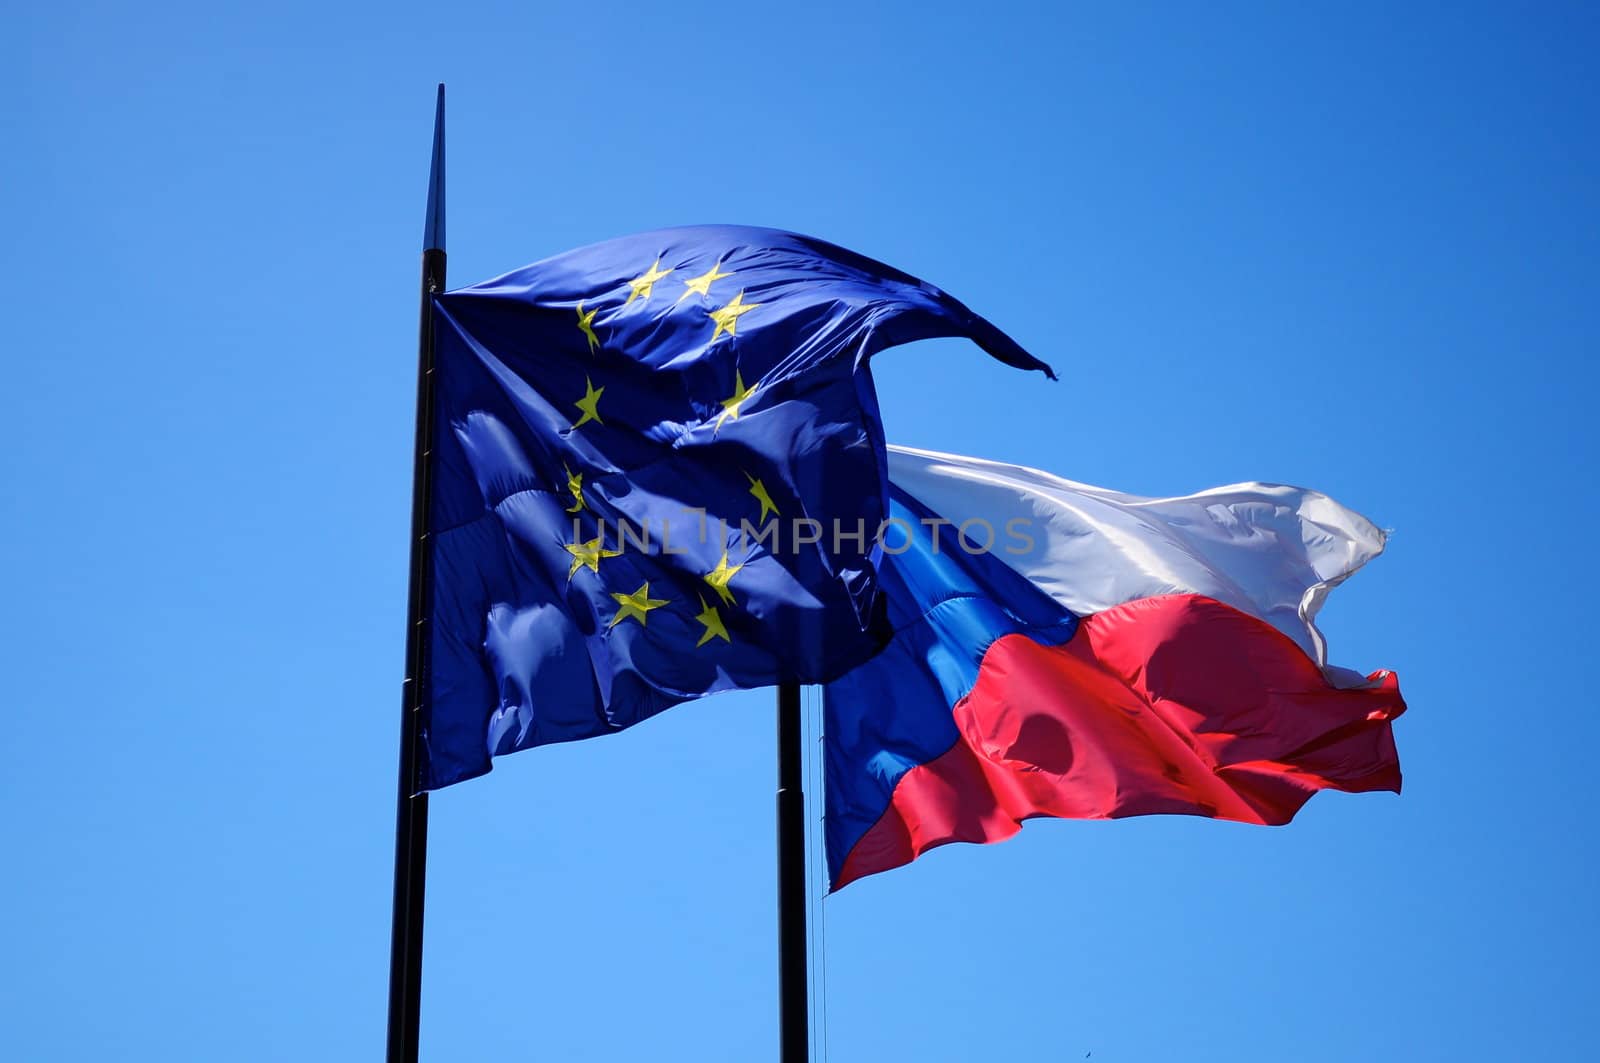 State flags on blue sky background by AnnaNouvier